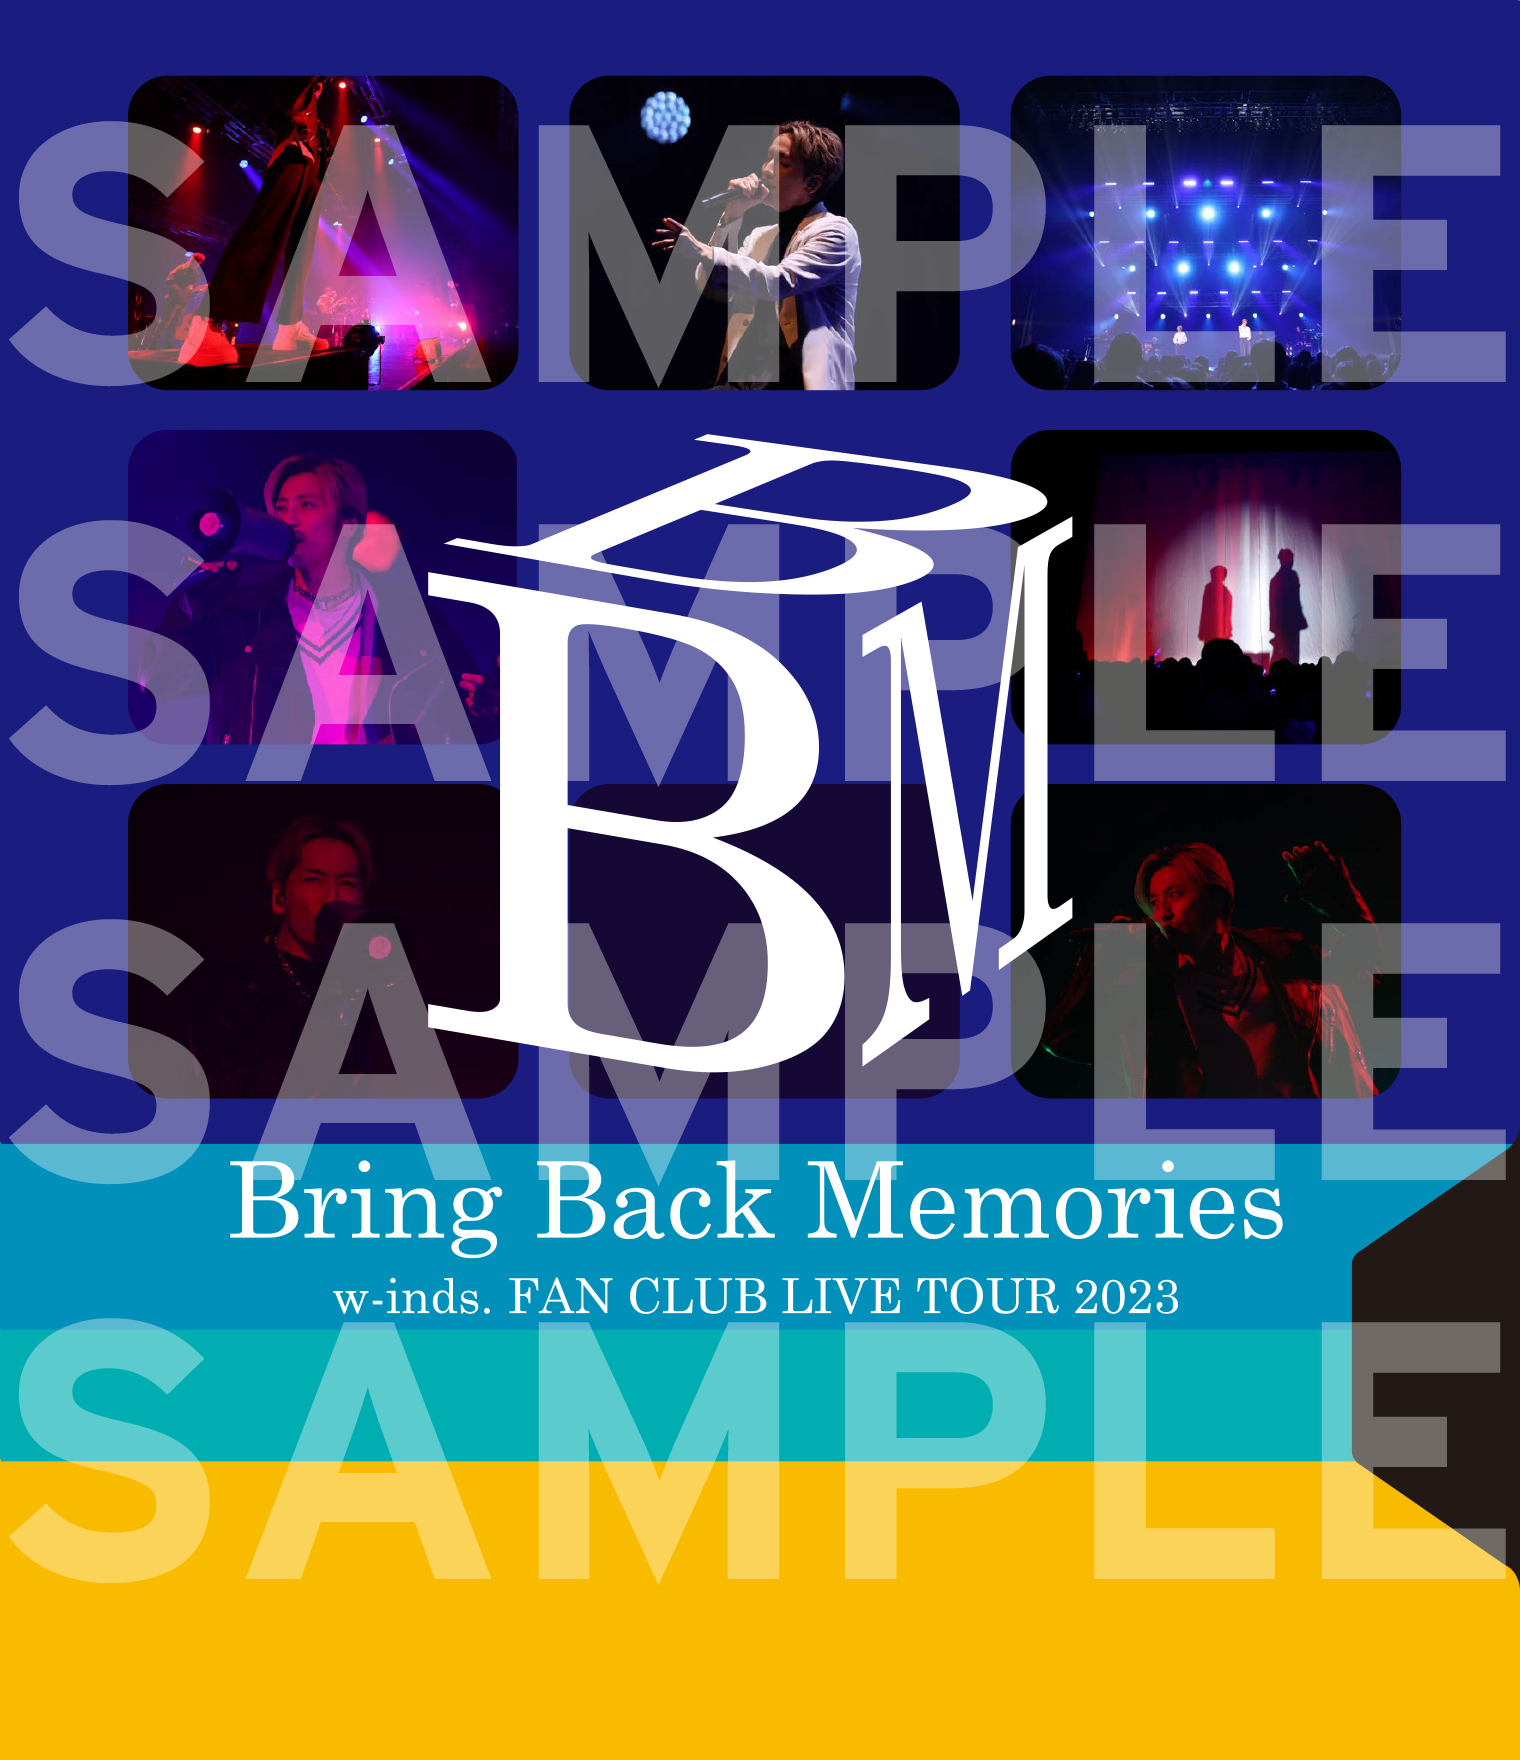 BACK TO THE MEMORIES Blu-rayセット - DVD/ブルーレイ